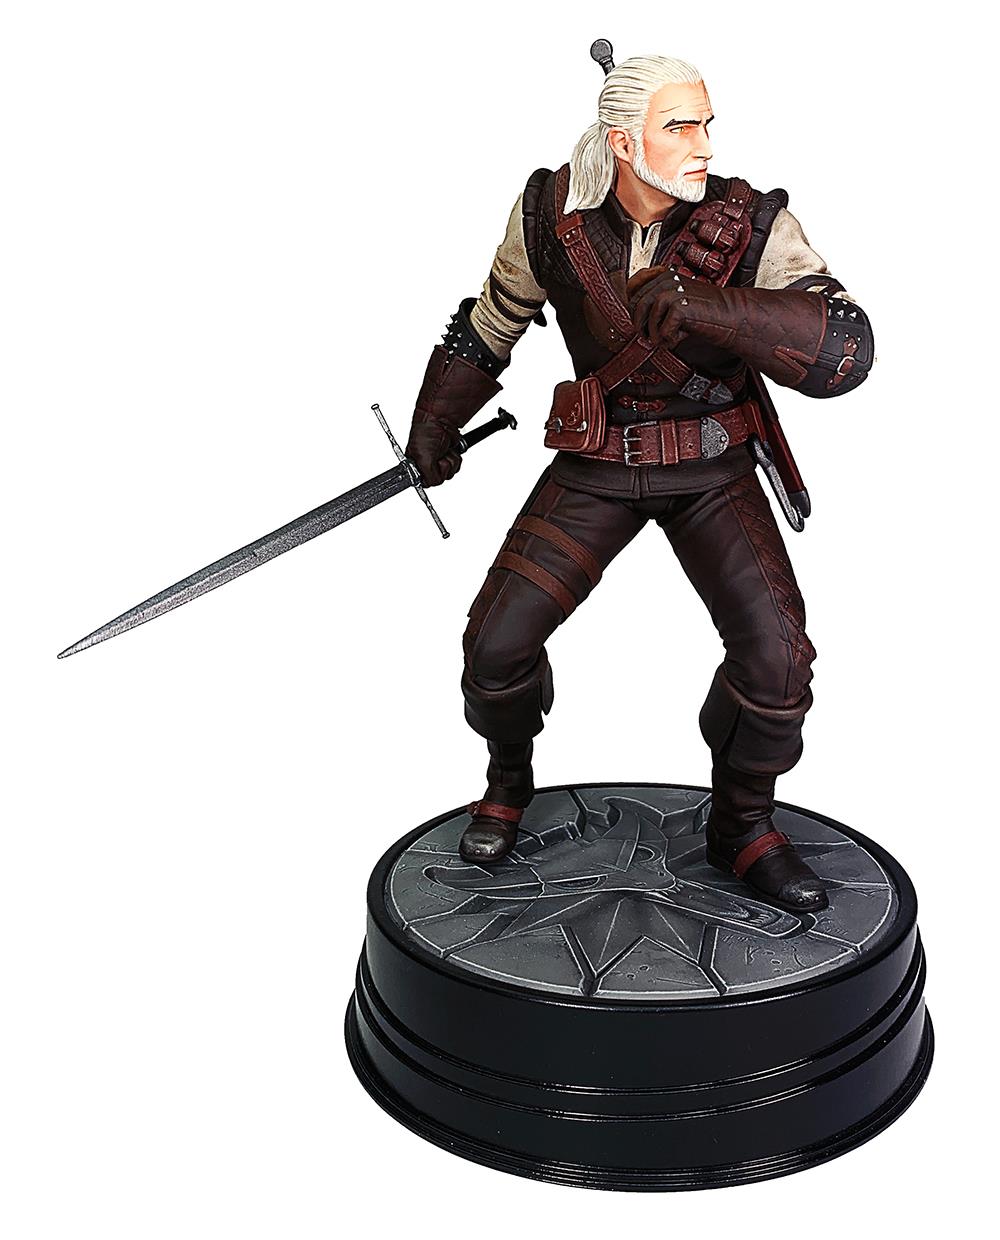 The Witcher 3 - The Wild Hunt: Geralt Of Rivia Manticore Armour Figure